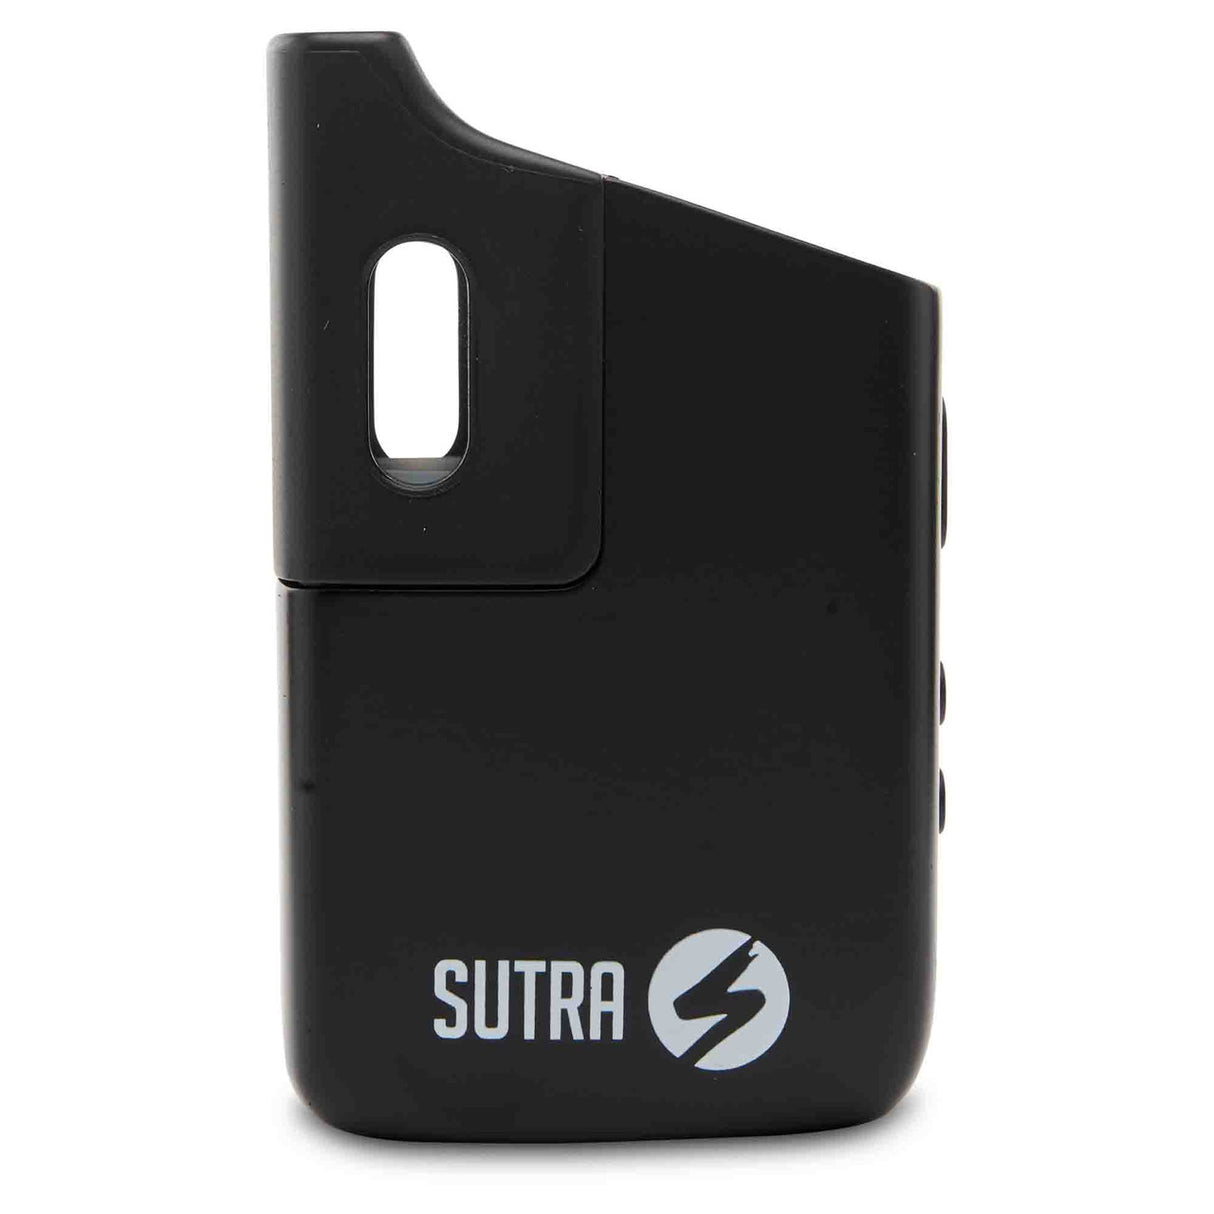 Sutra Mini dry herb and concentrate vaporizer